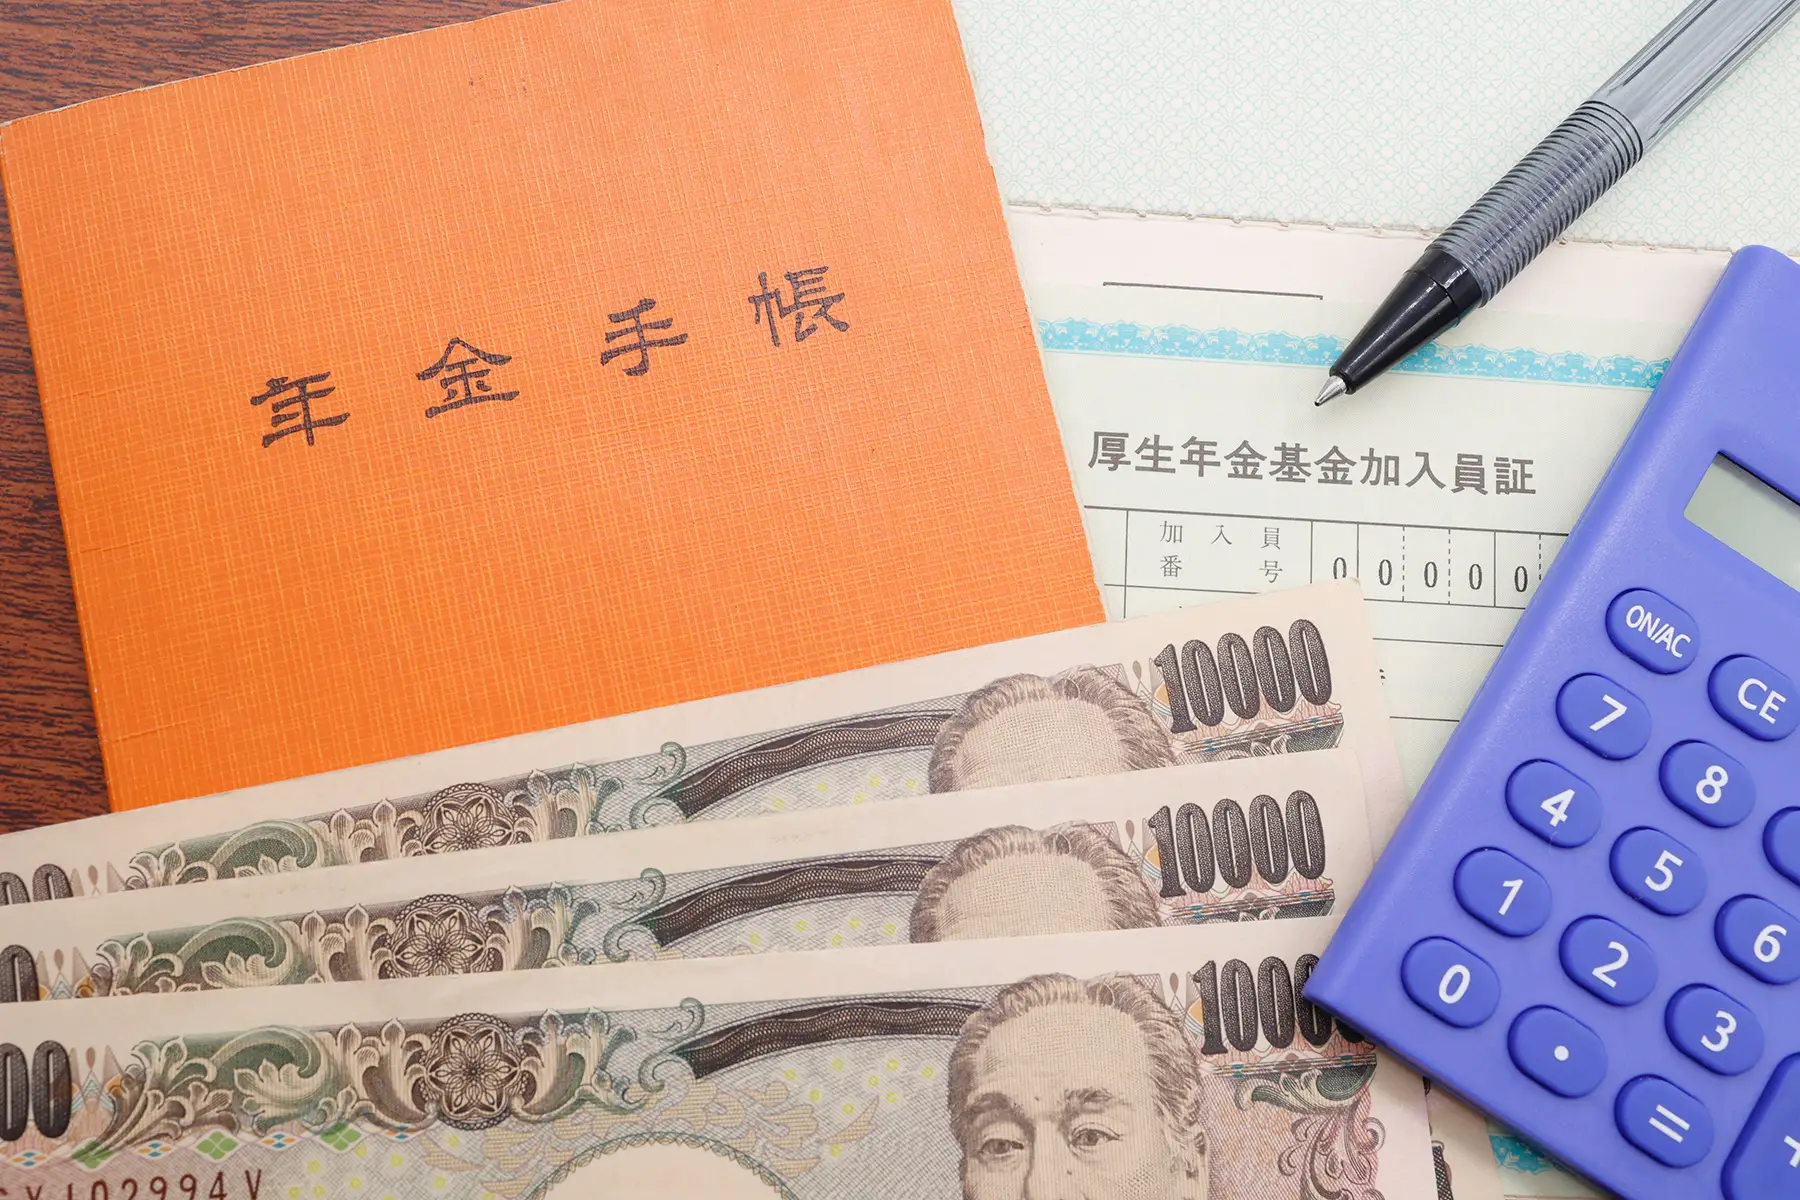 An orange booklet for pensions, ¥3,000 in notes, a calculator, and a social security form on a desk